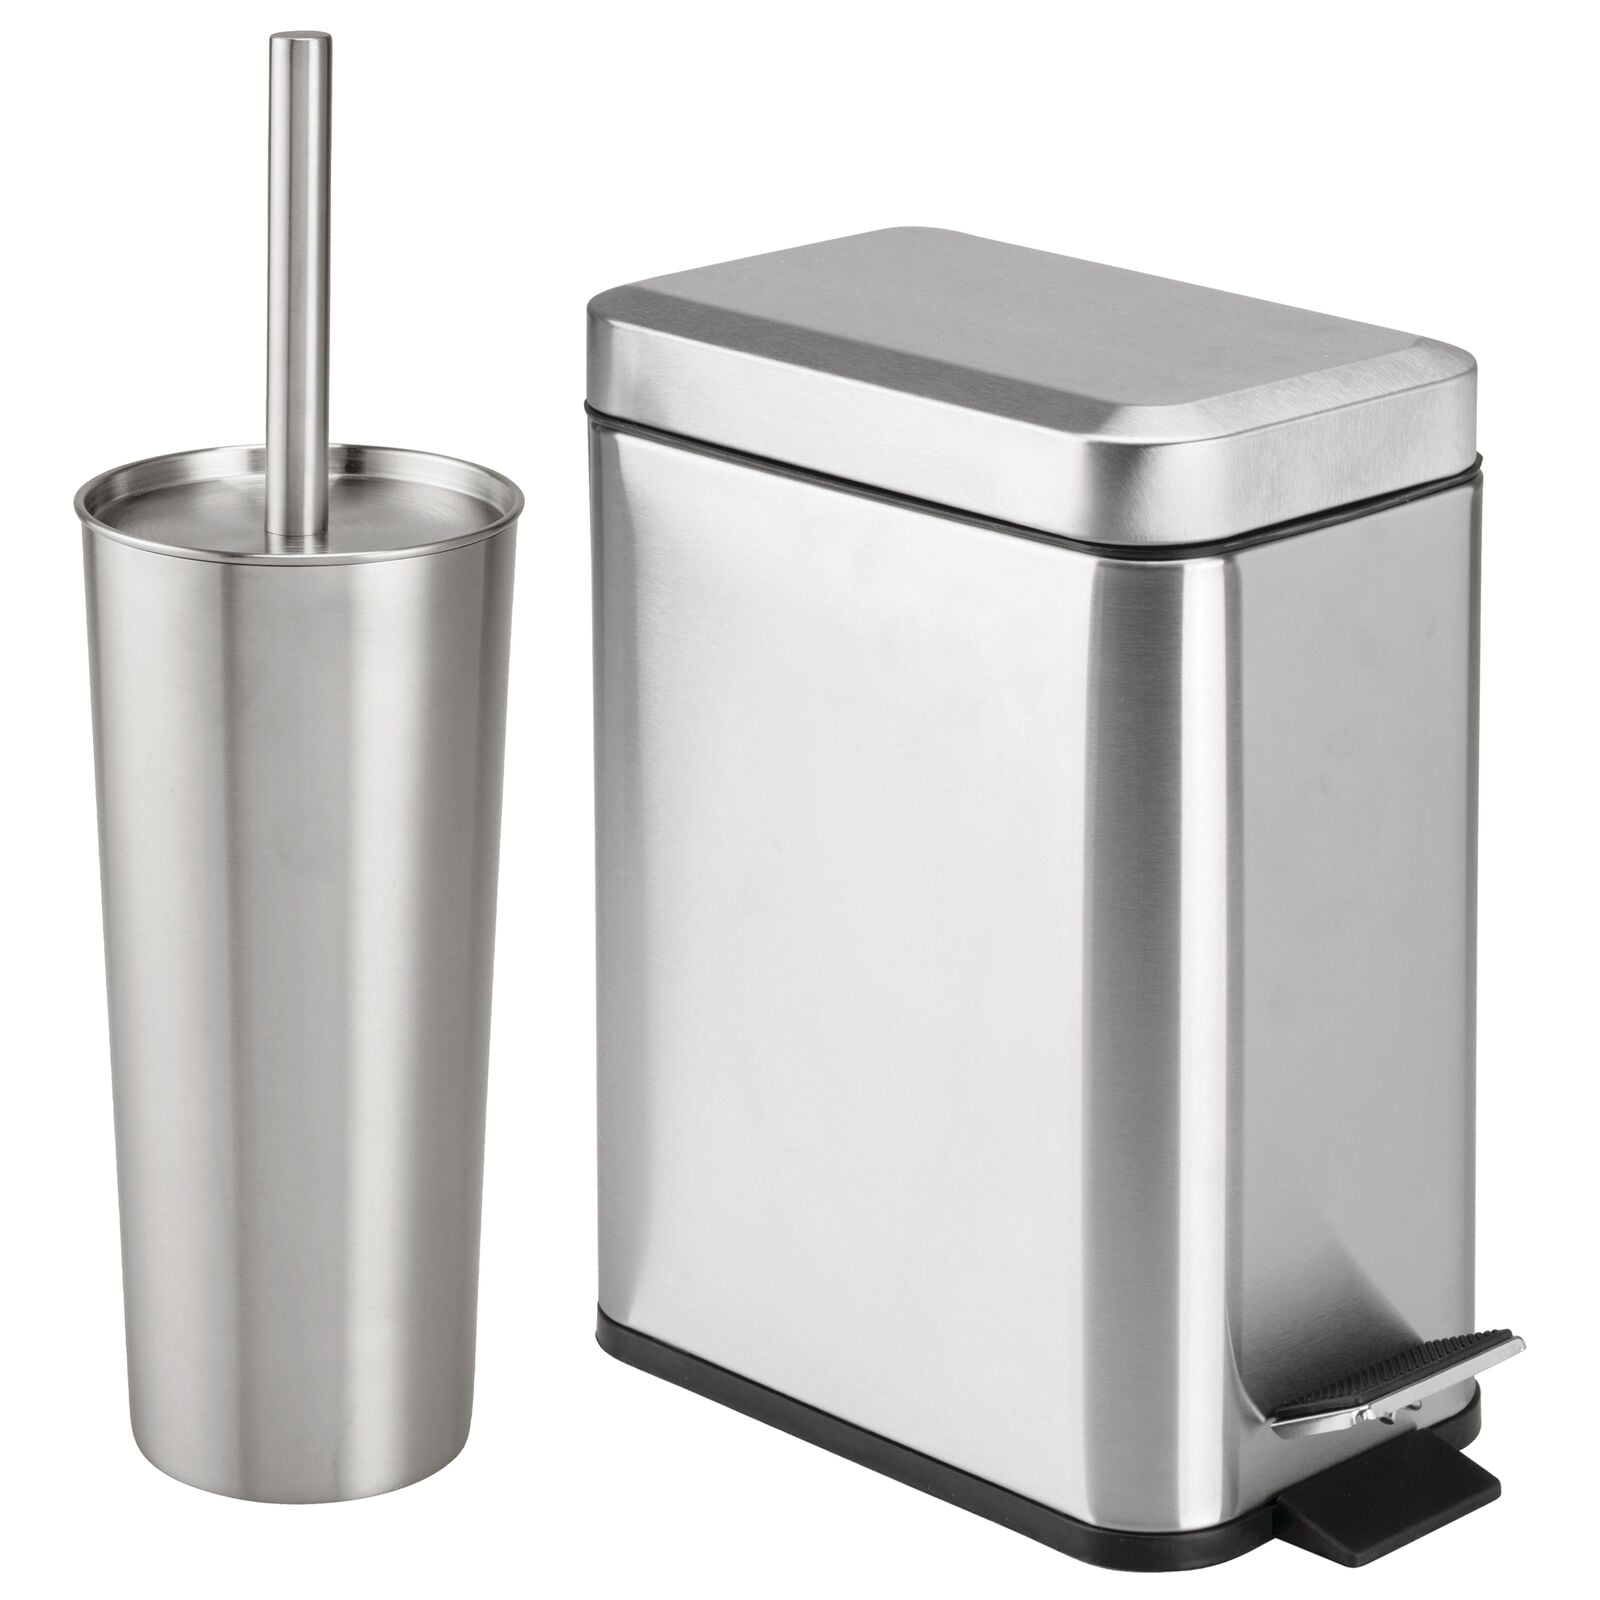 Brushed Stainless Steel Pack of 2 mDesign Toilet Bowl Brush and Holder for Bathroom Storage 